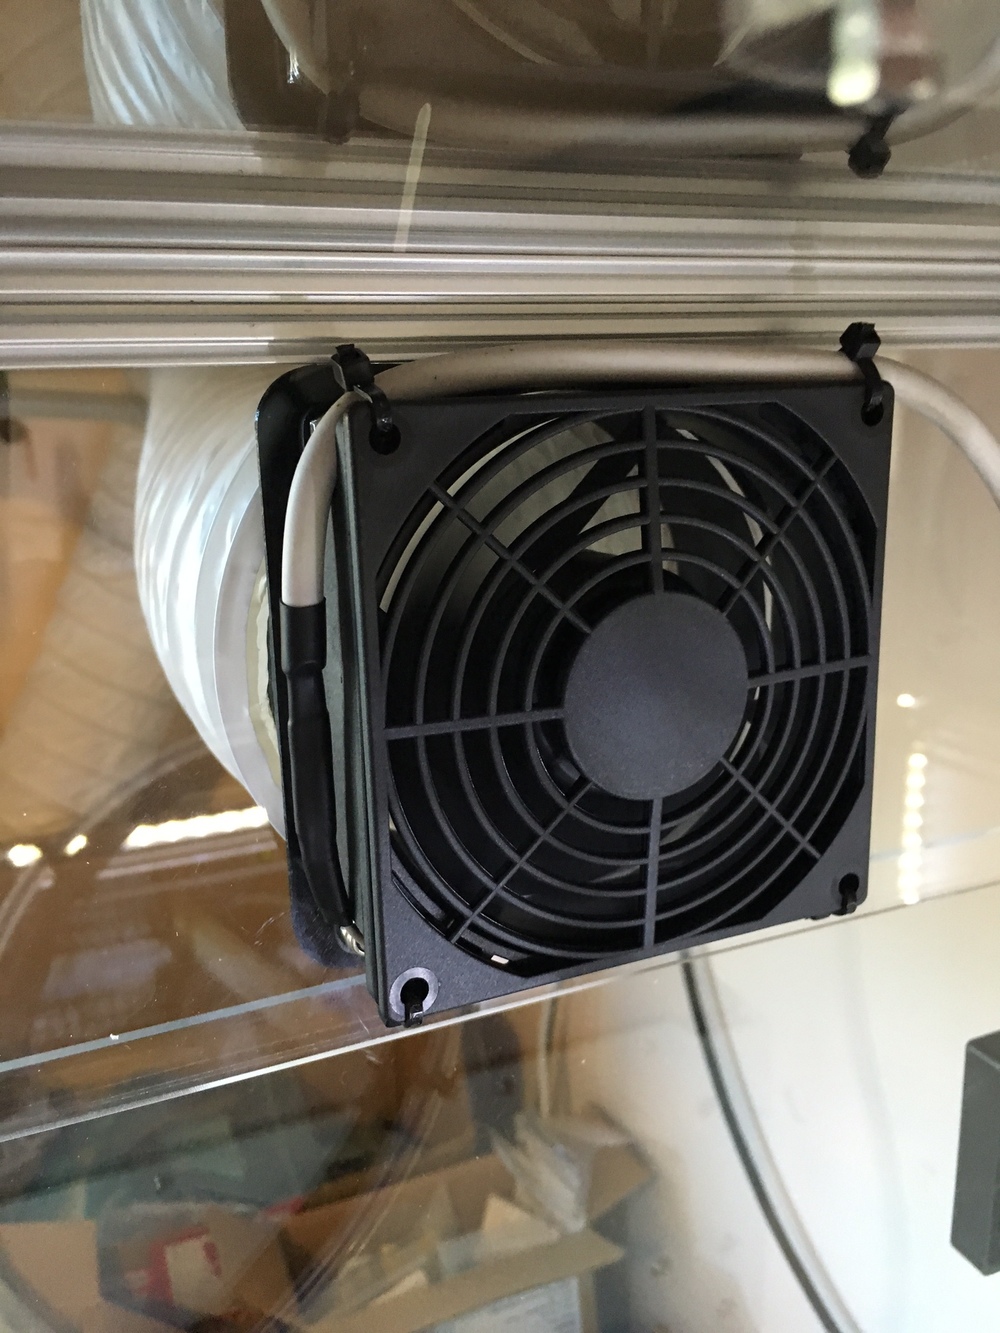 Enclosure extraction fan and fan guard